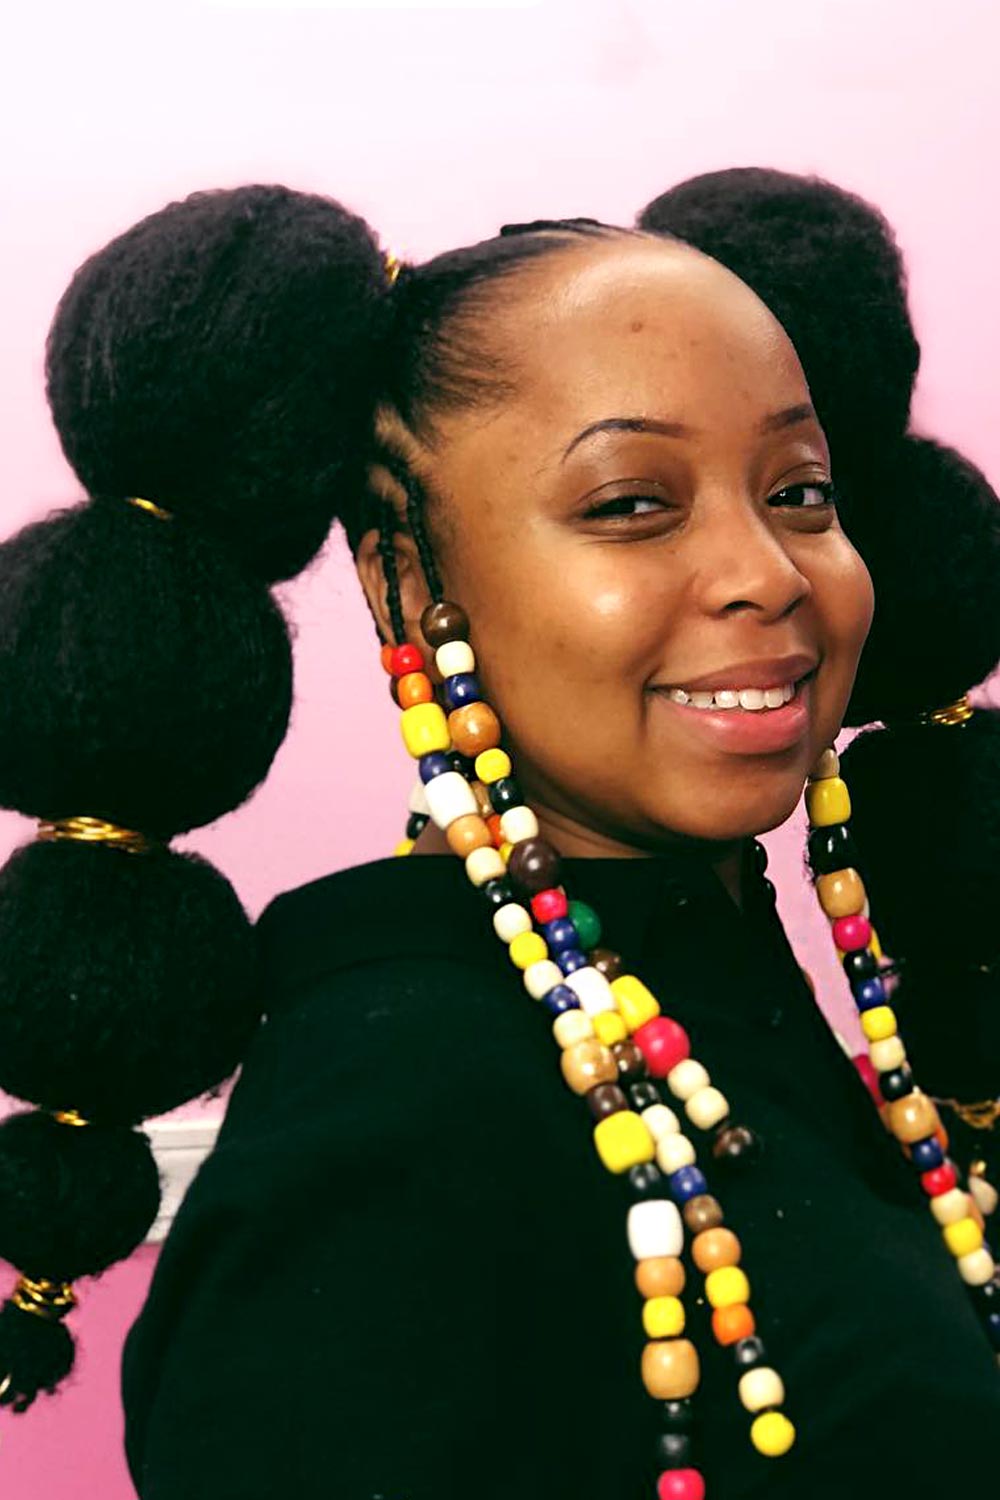 Rubber Band Hairstyles for Bubble Ponytails Afro #rubberbandhairstyles #naturalhairstyles #kidshairstyles